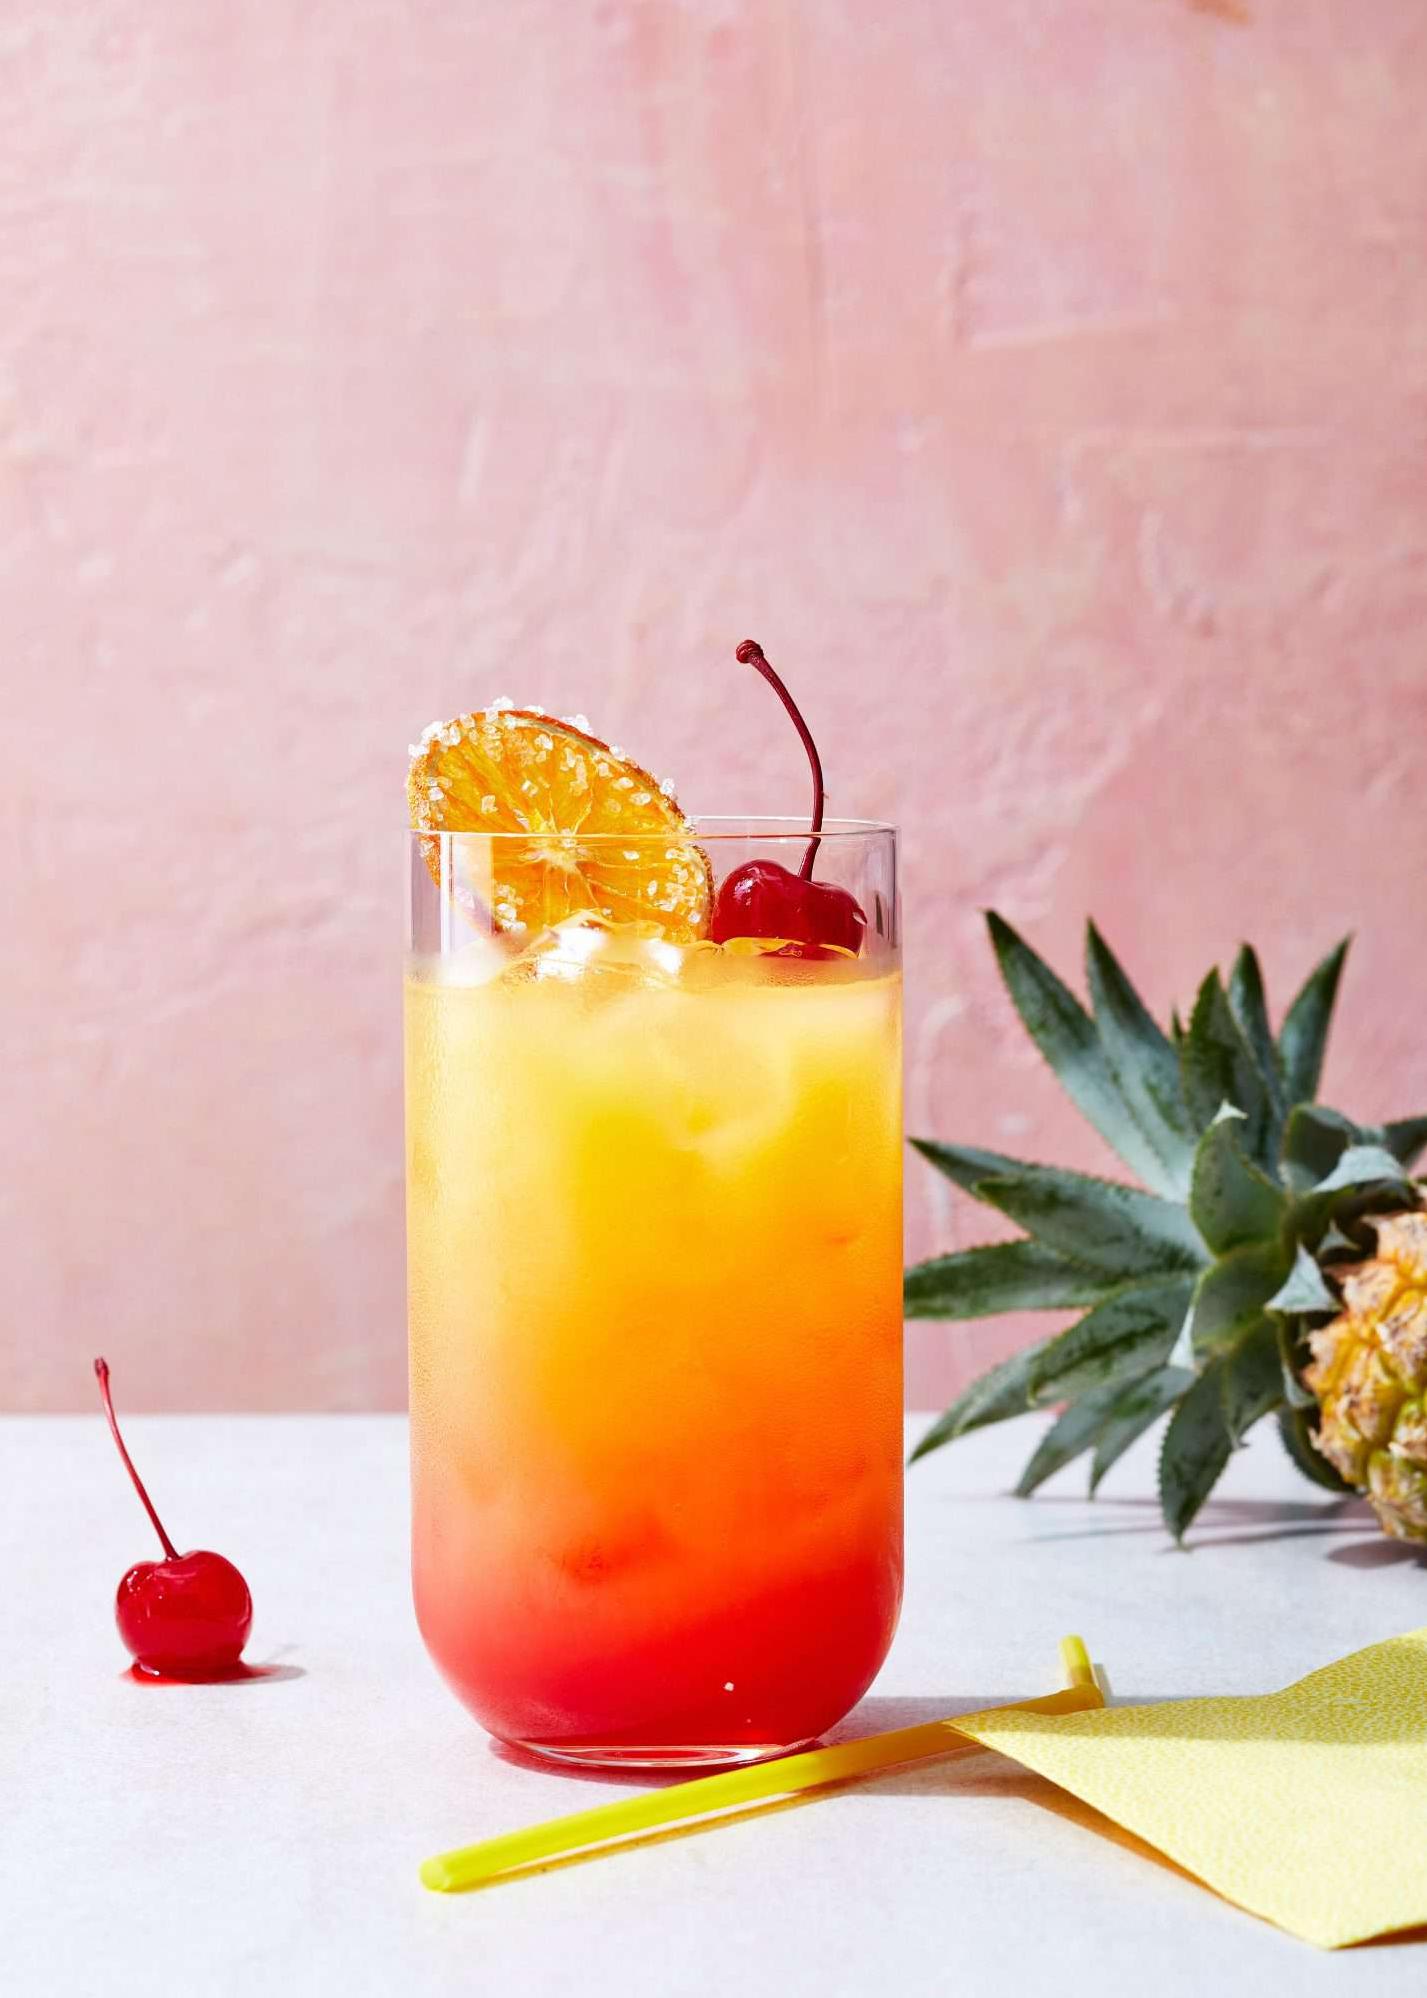 Enjoy the Southern Sunshine Cocktail Recipe Today